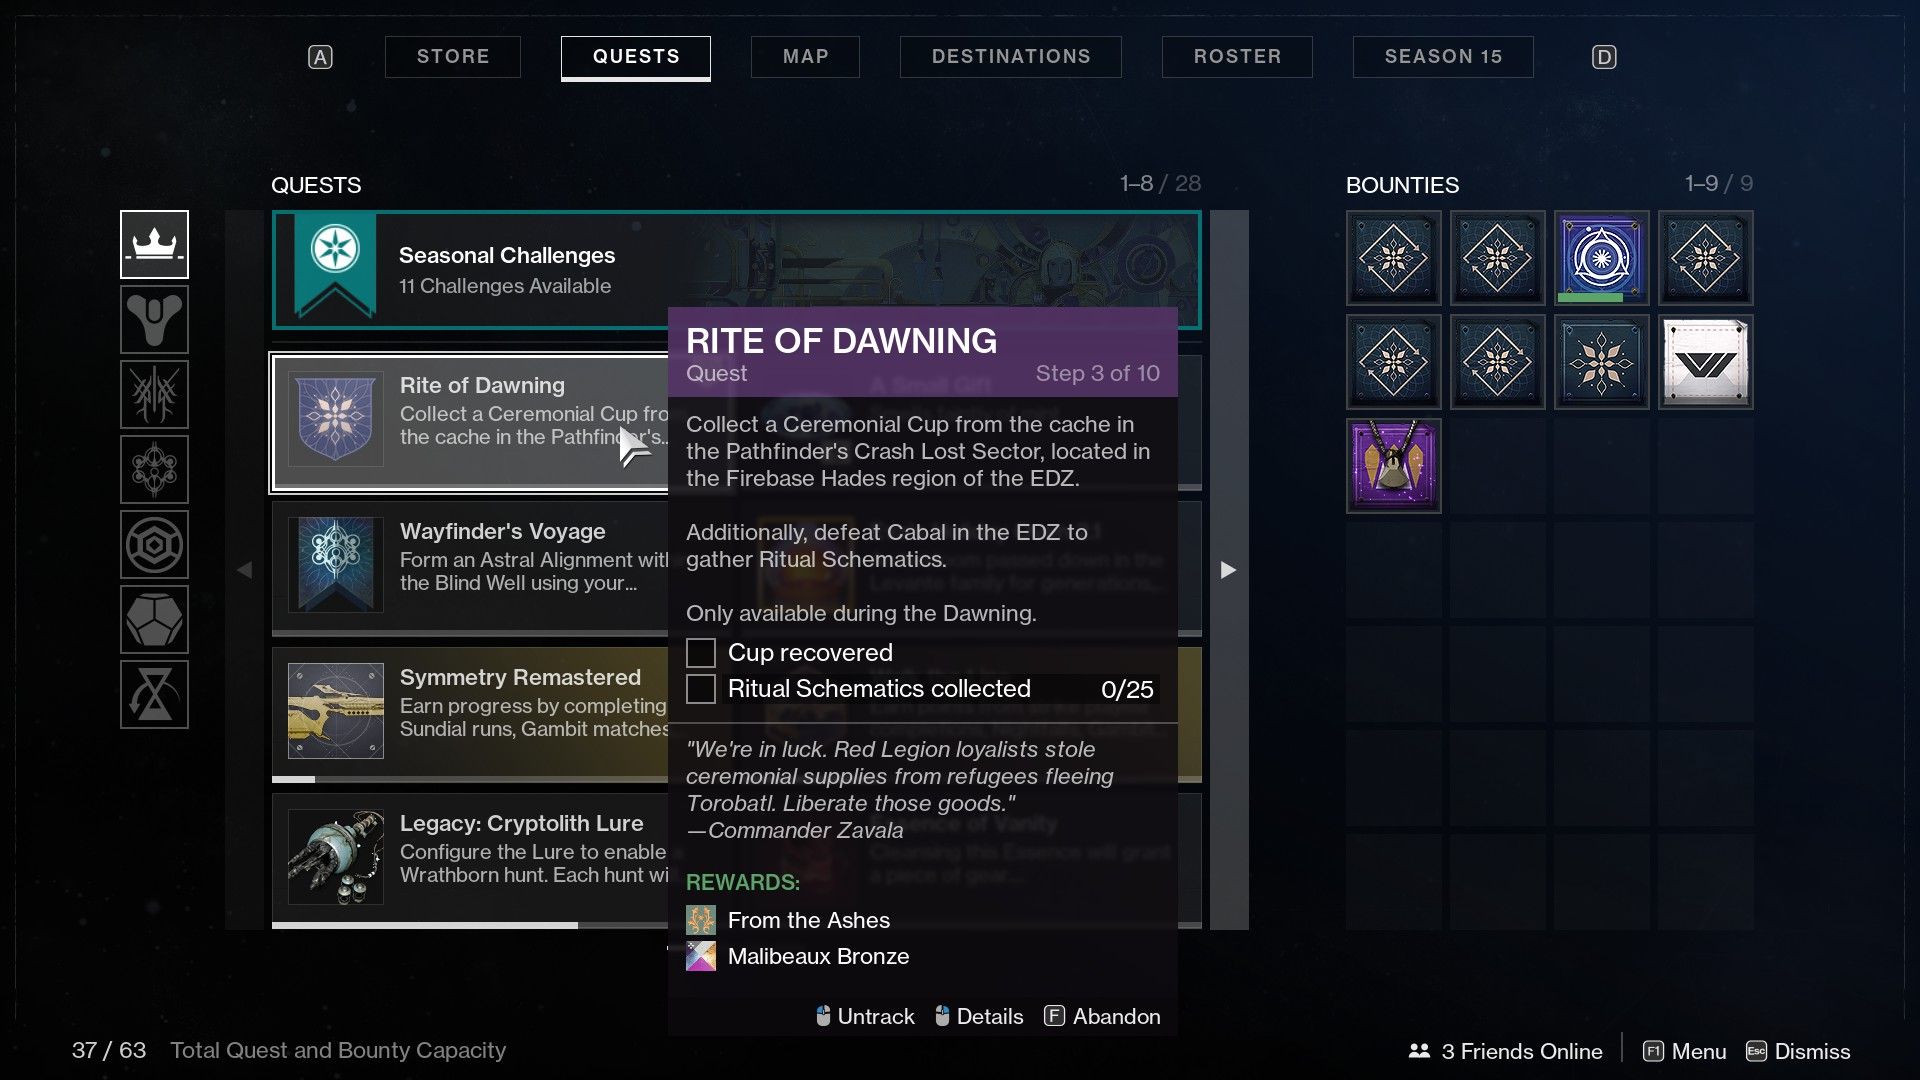 Destiny 2 Dawning 2021: How to Complete the Rite of Dawning Quest